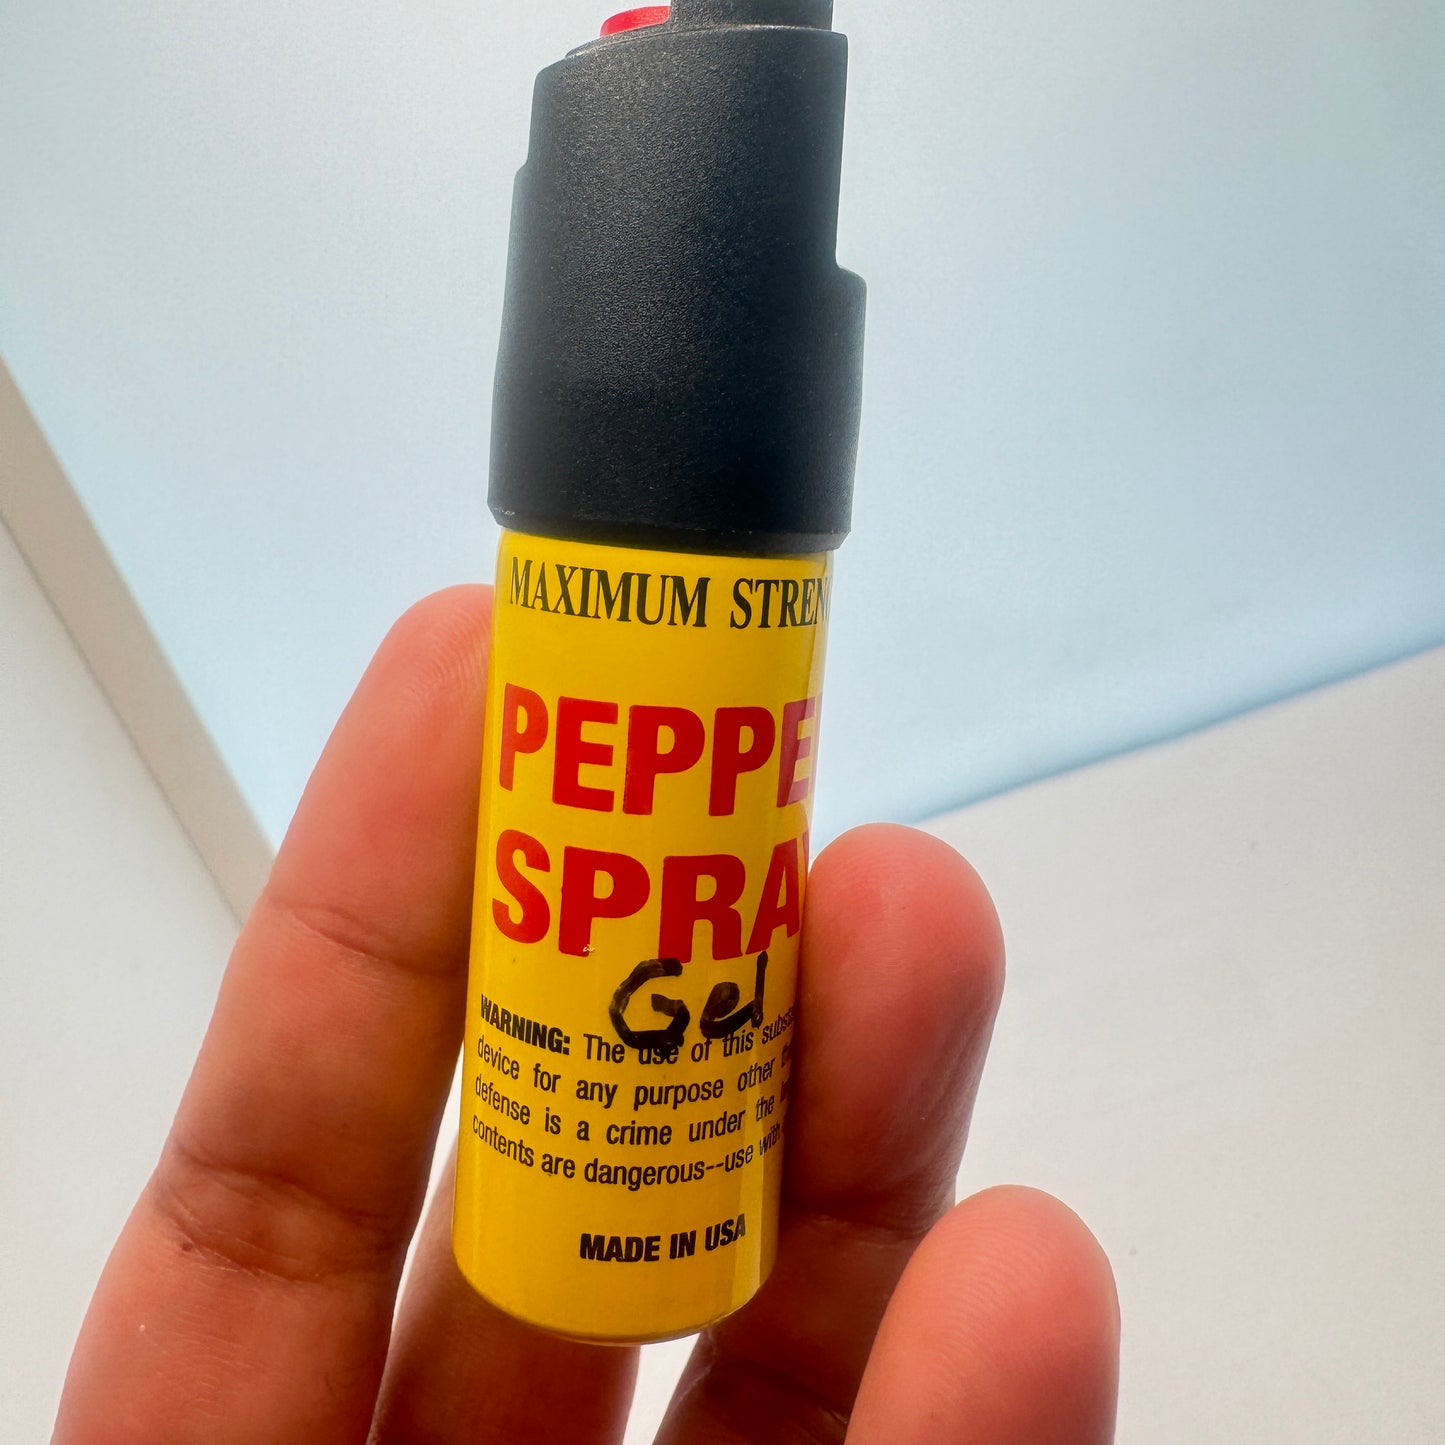 Protect yourself with this brand new Pepper Spray, proudly made in the USA. Its locked side feature allows you to easily move it to ready spray, ensuring quick and easy access during emergency situations. The spray is highly effective and delivers a poten